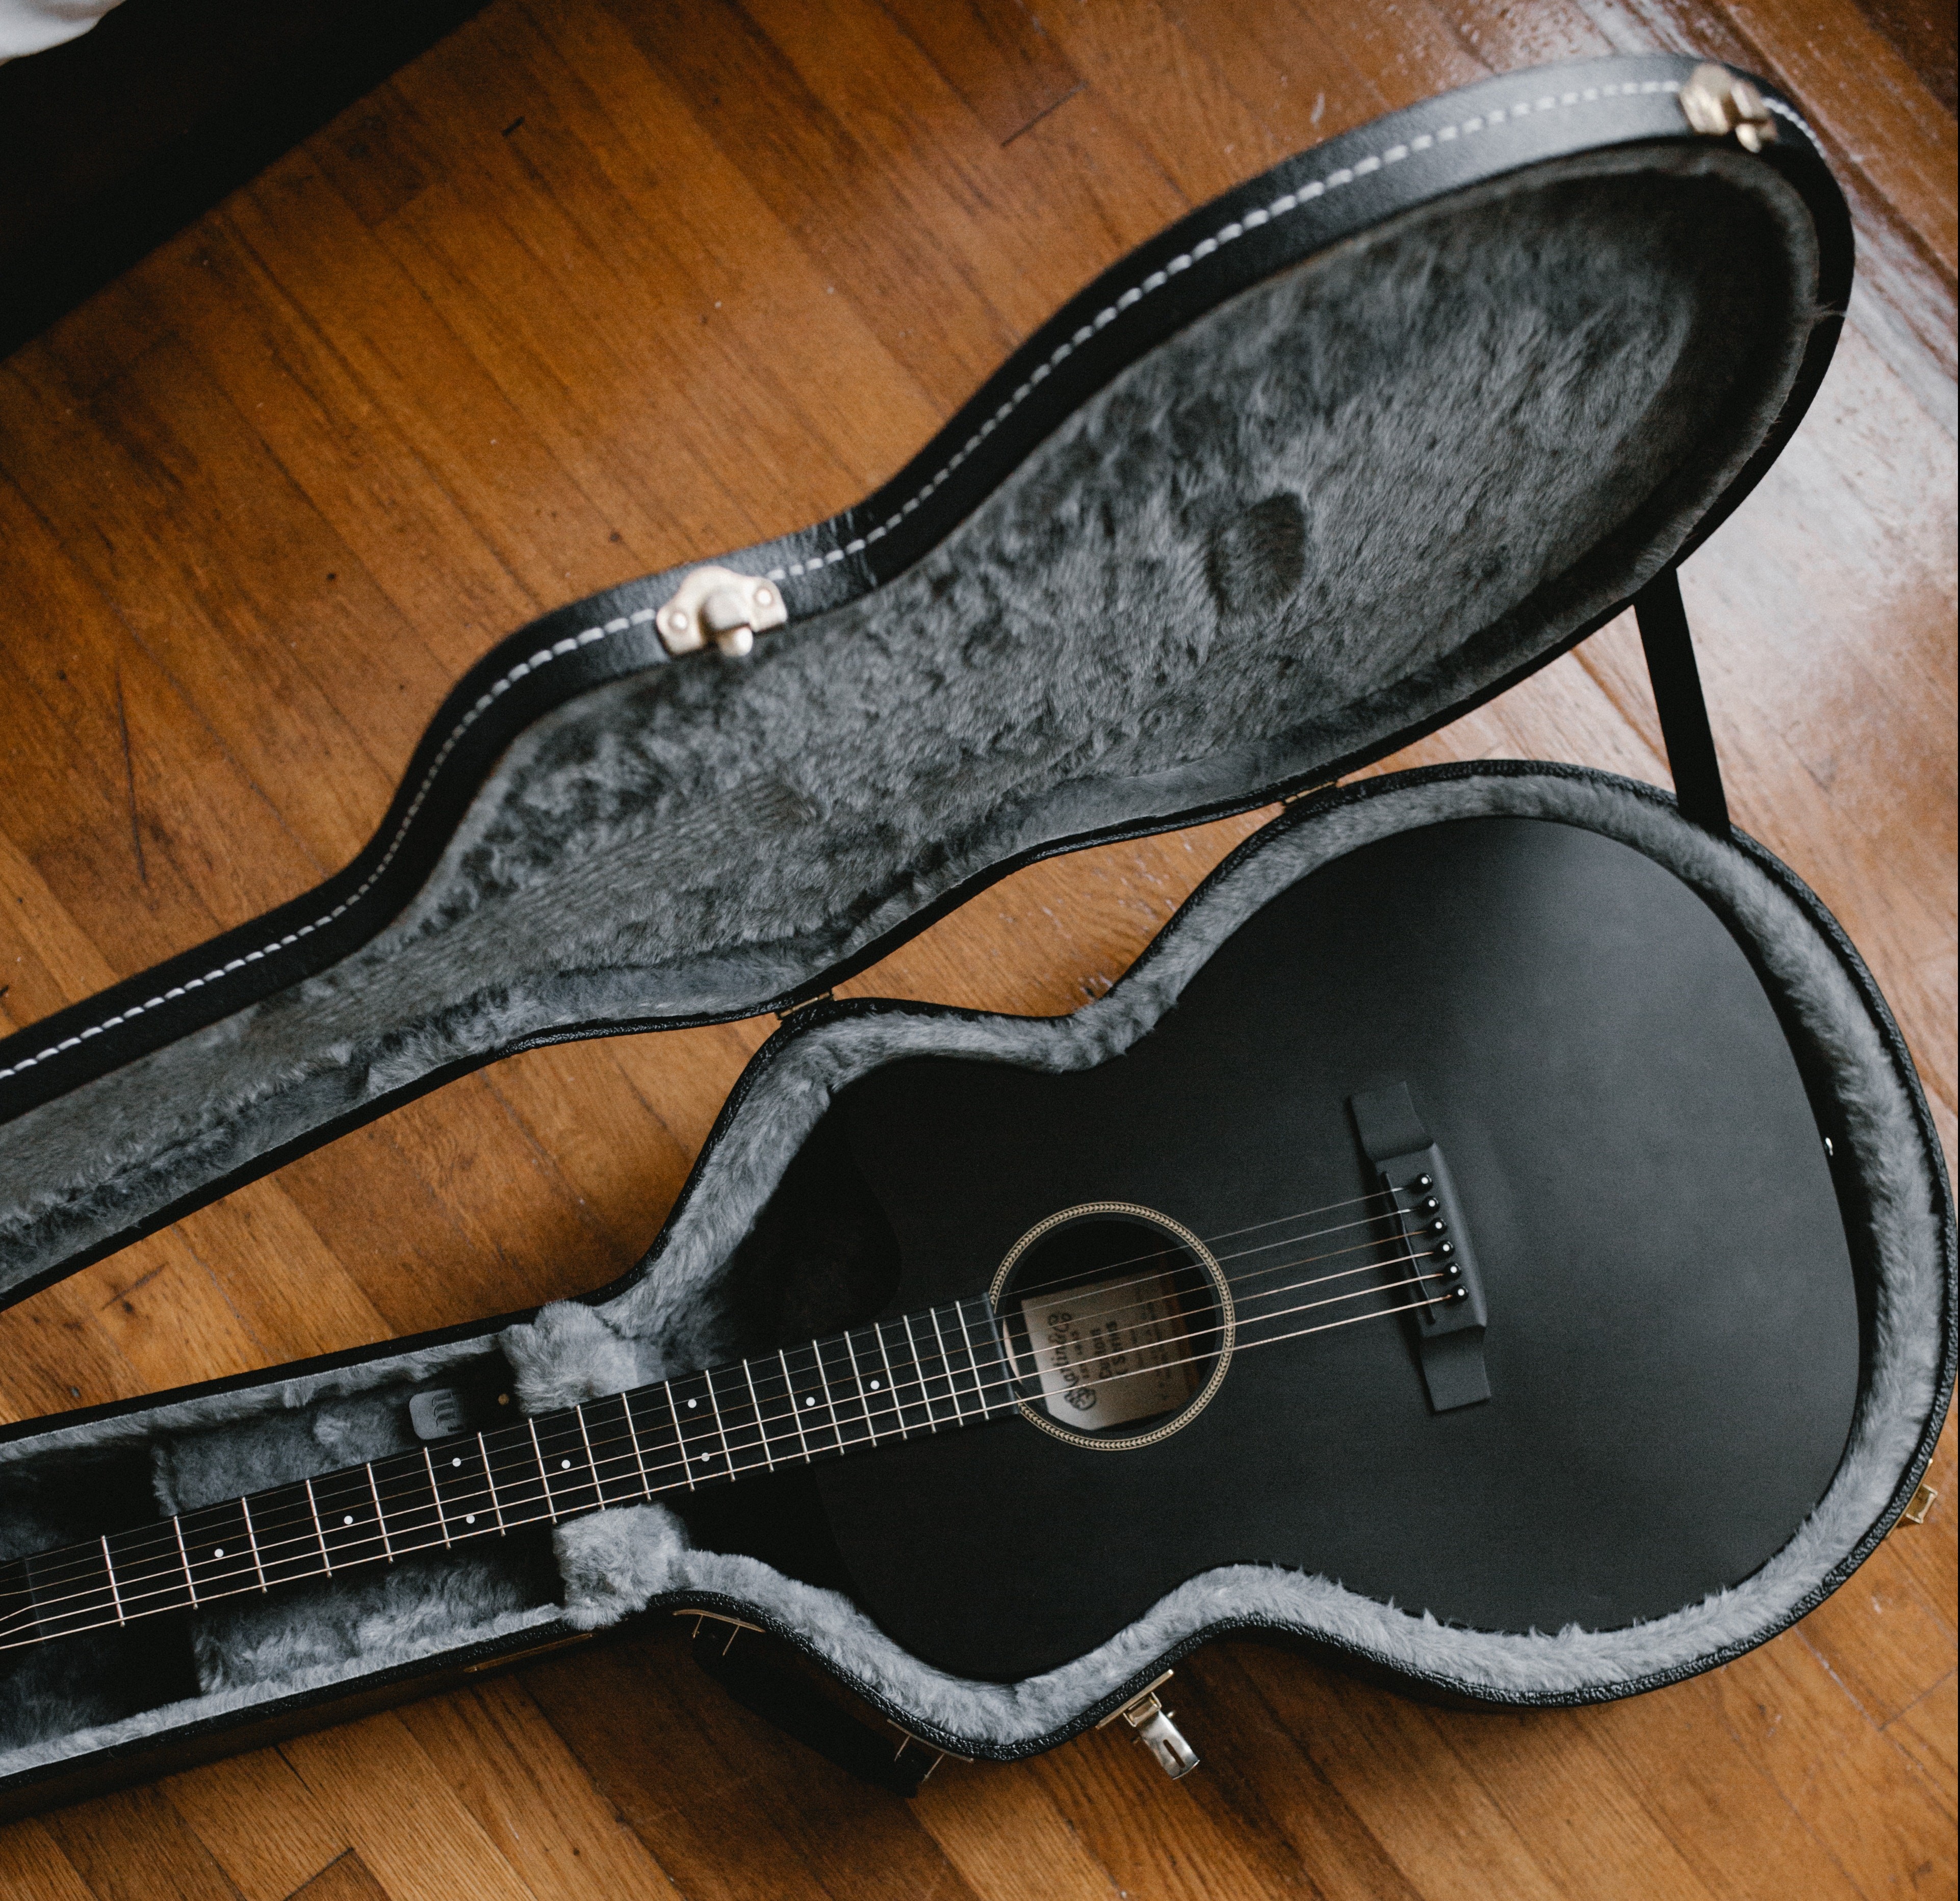 How to pack your guitar for shipping?